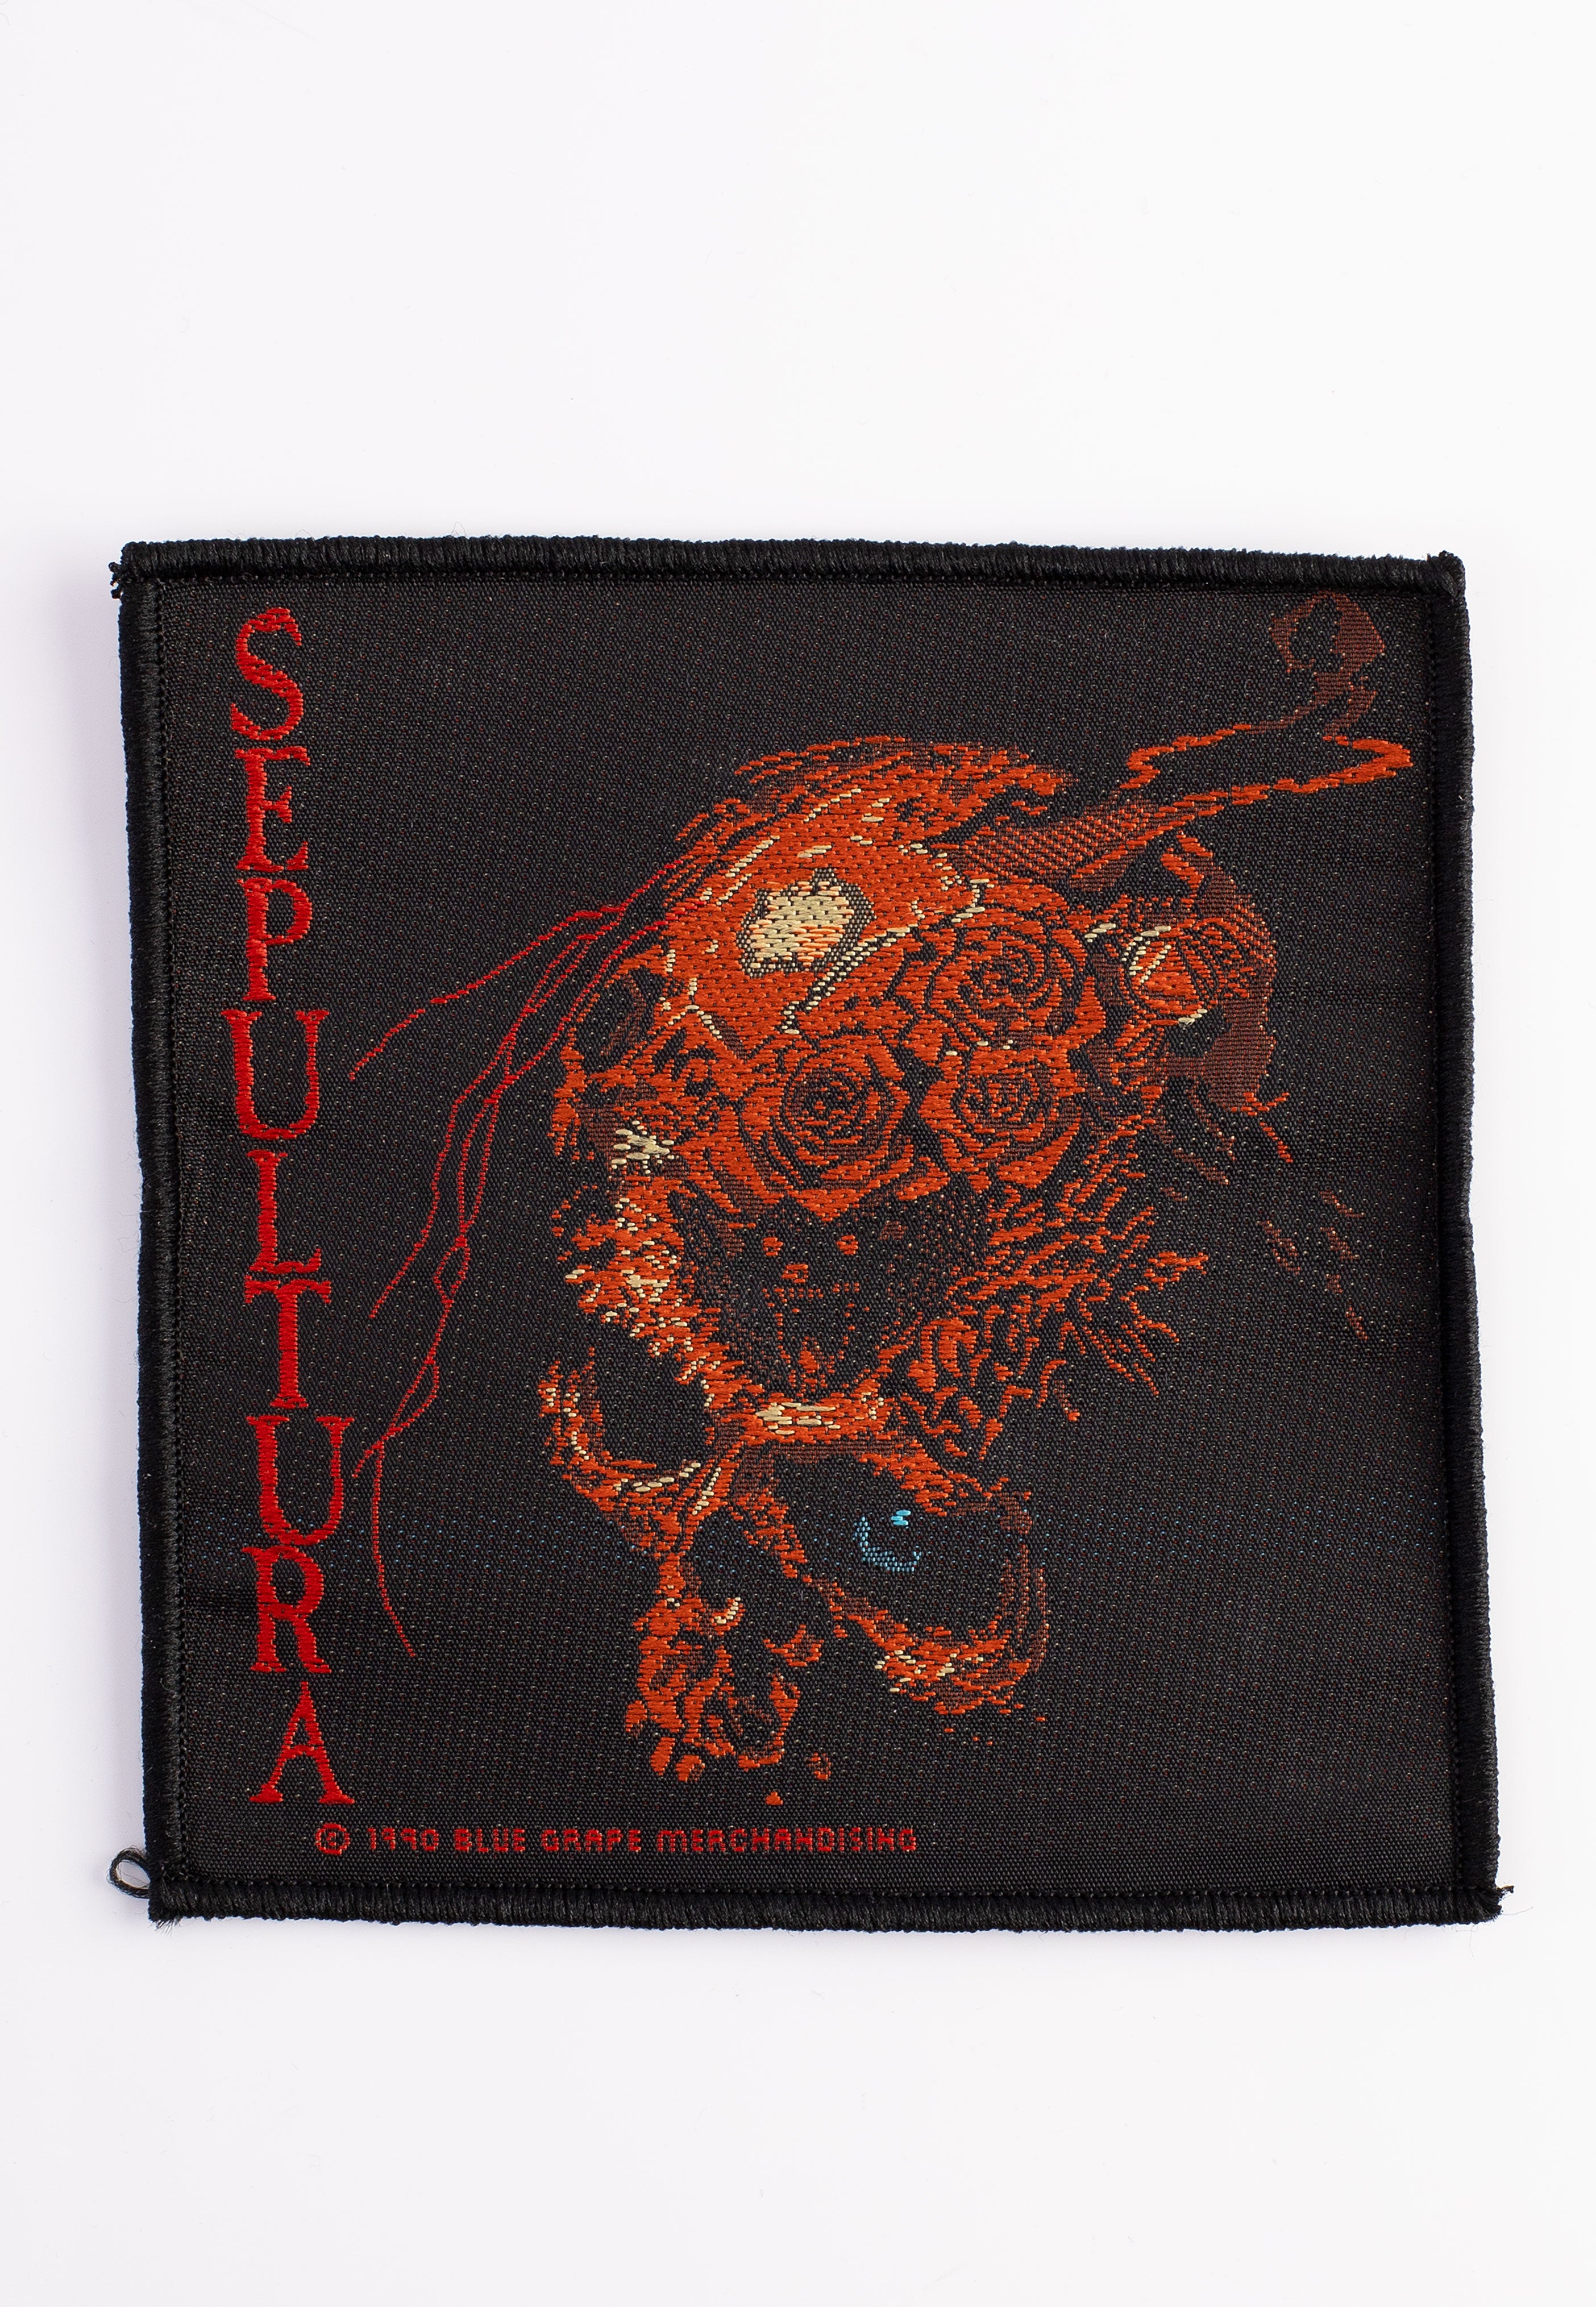 Sepultura - Beneath The Remains - Patch